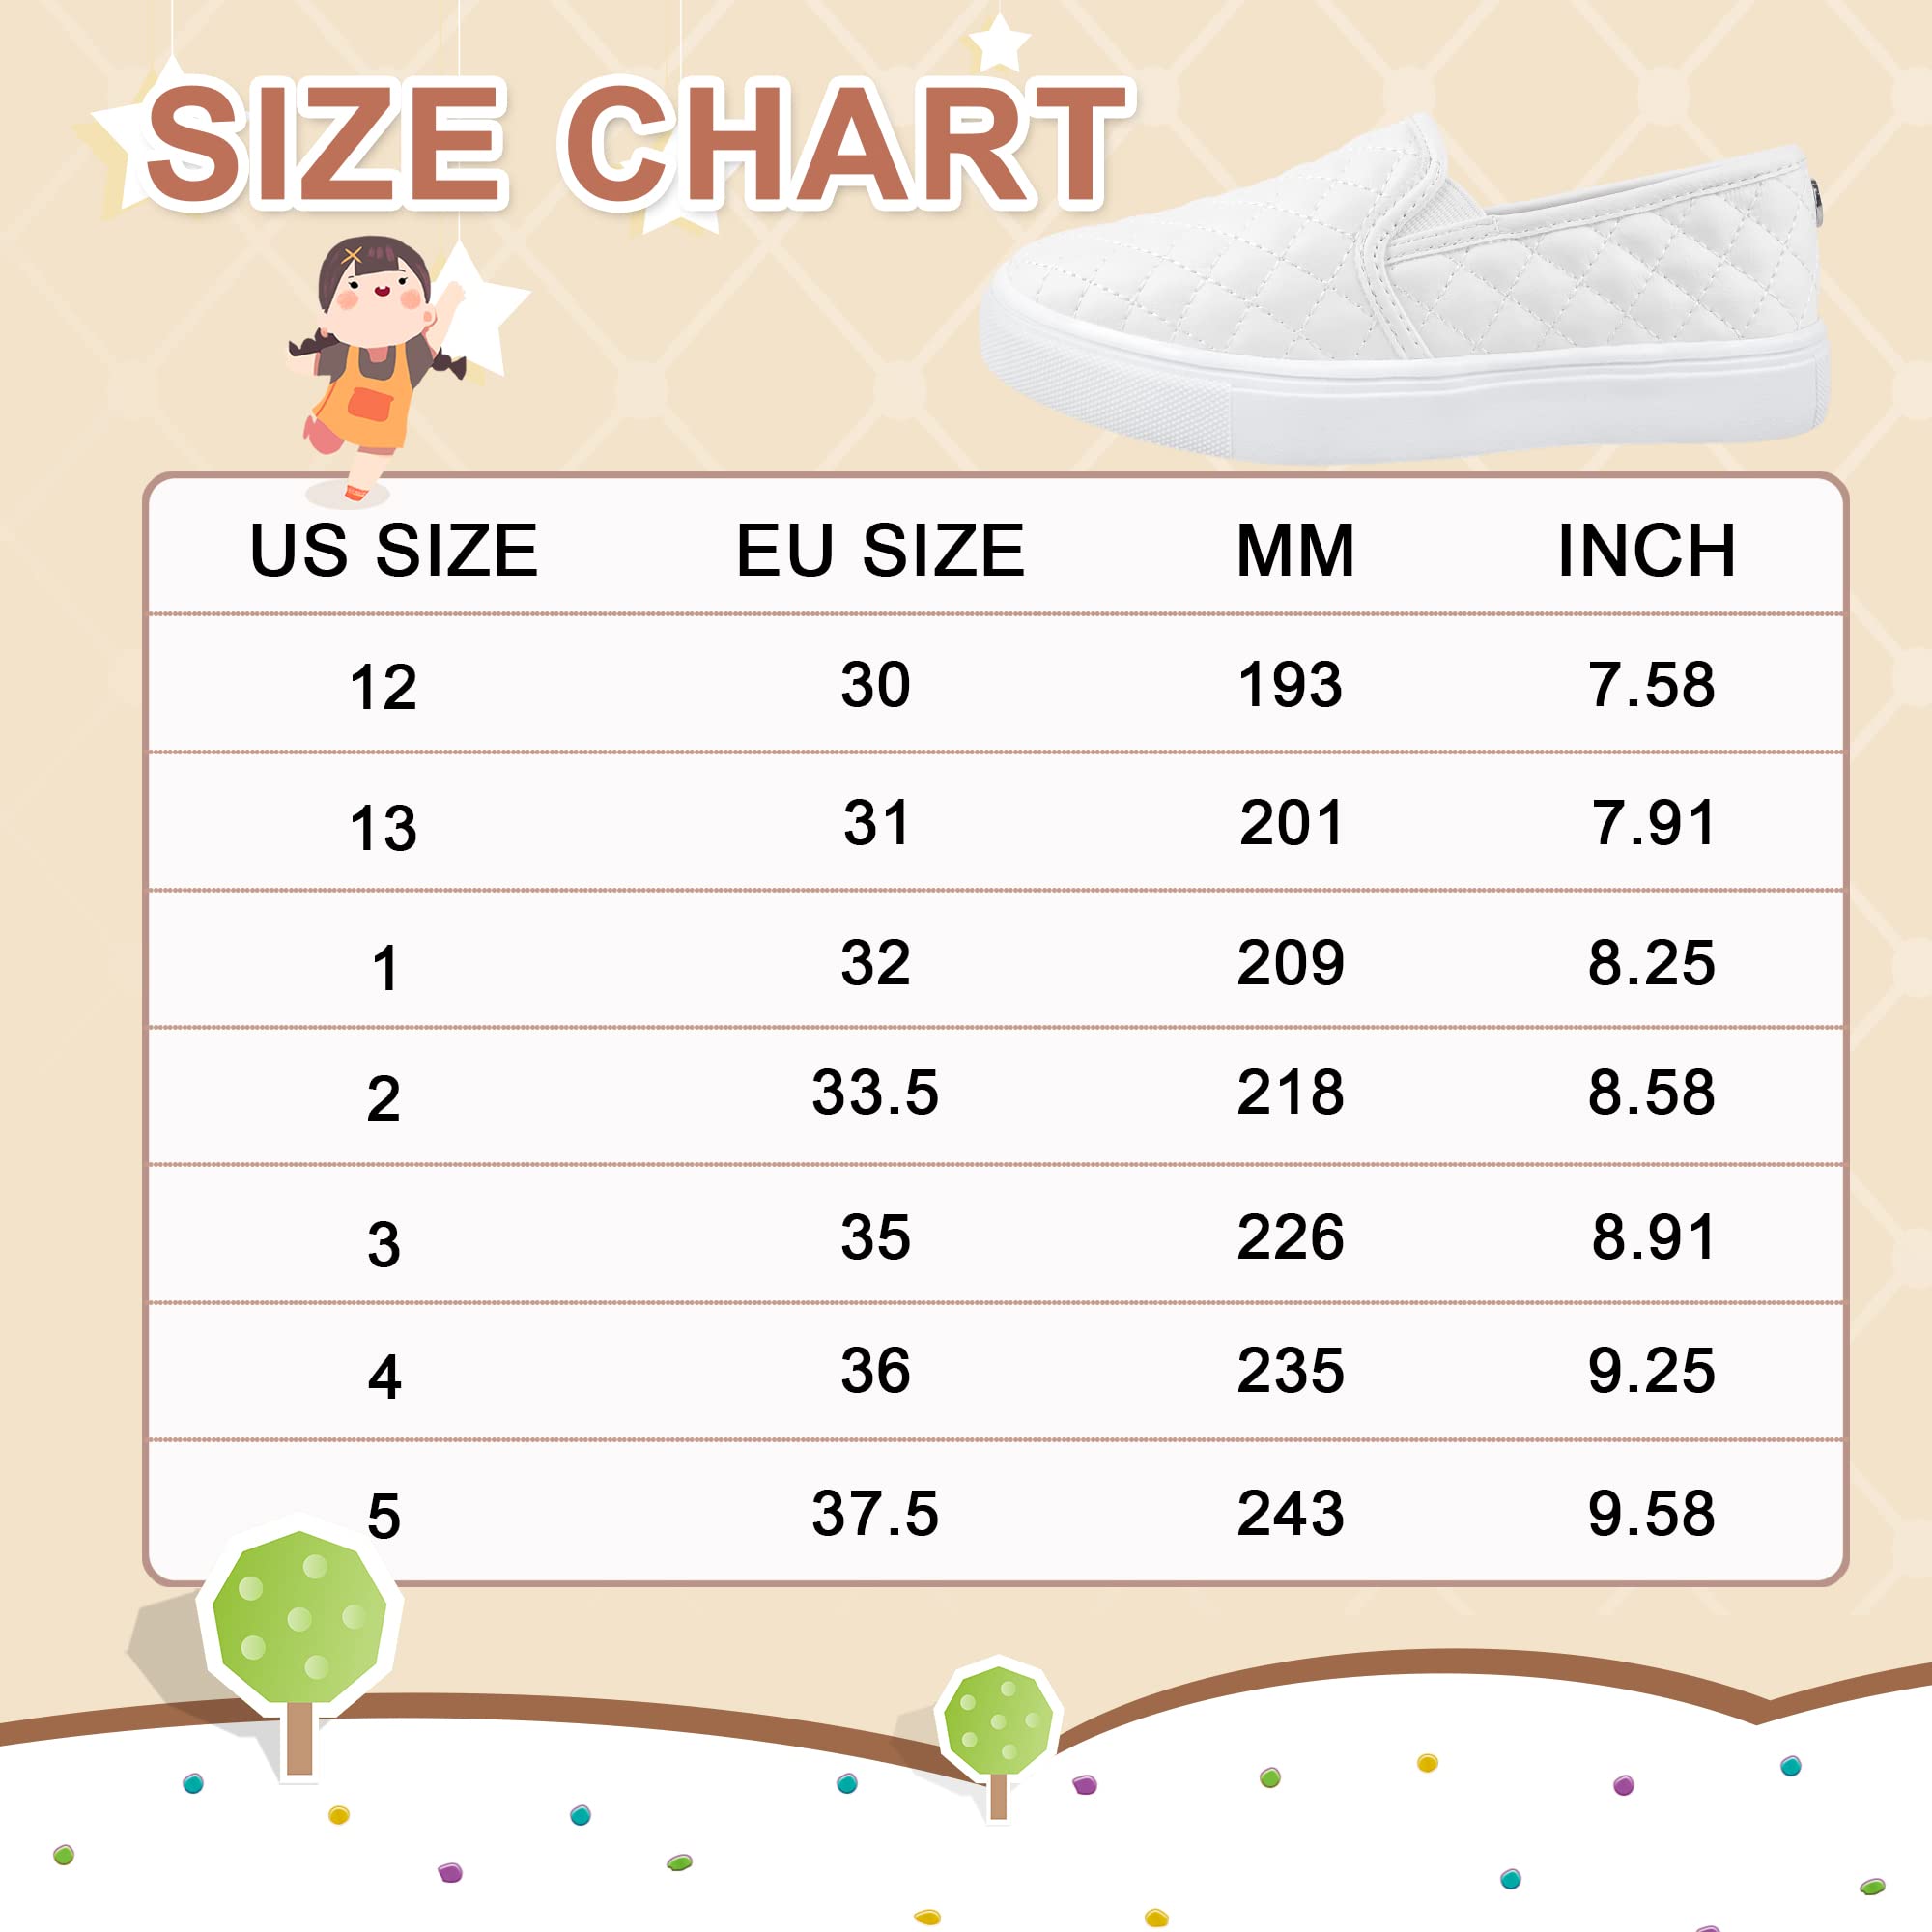 Tuboom Sneakers for Girls Slip On Shoes Little/Big Kid Comfort Low Top Fashion Tennis/Walking Casual Sneakers for Kids